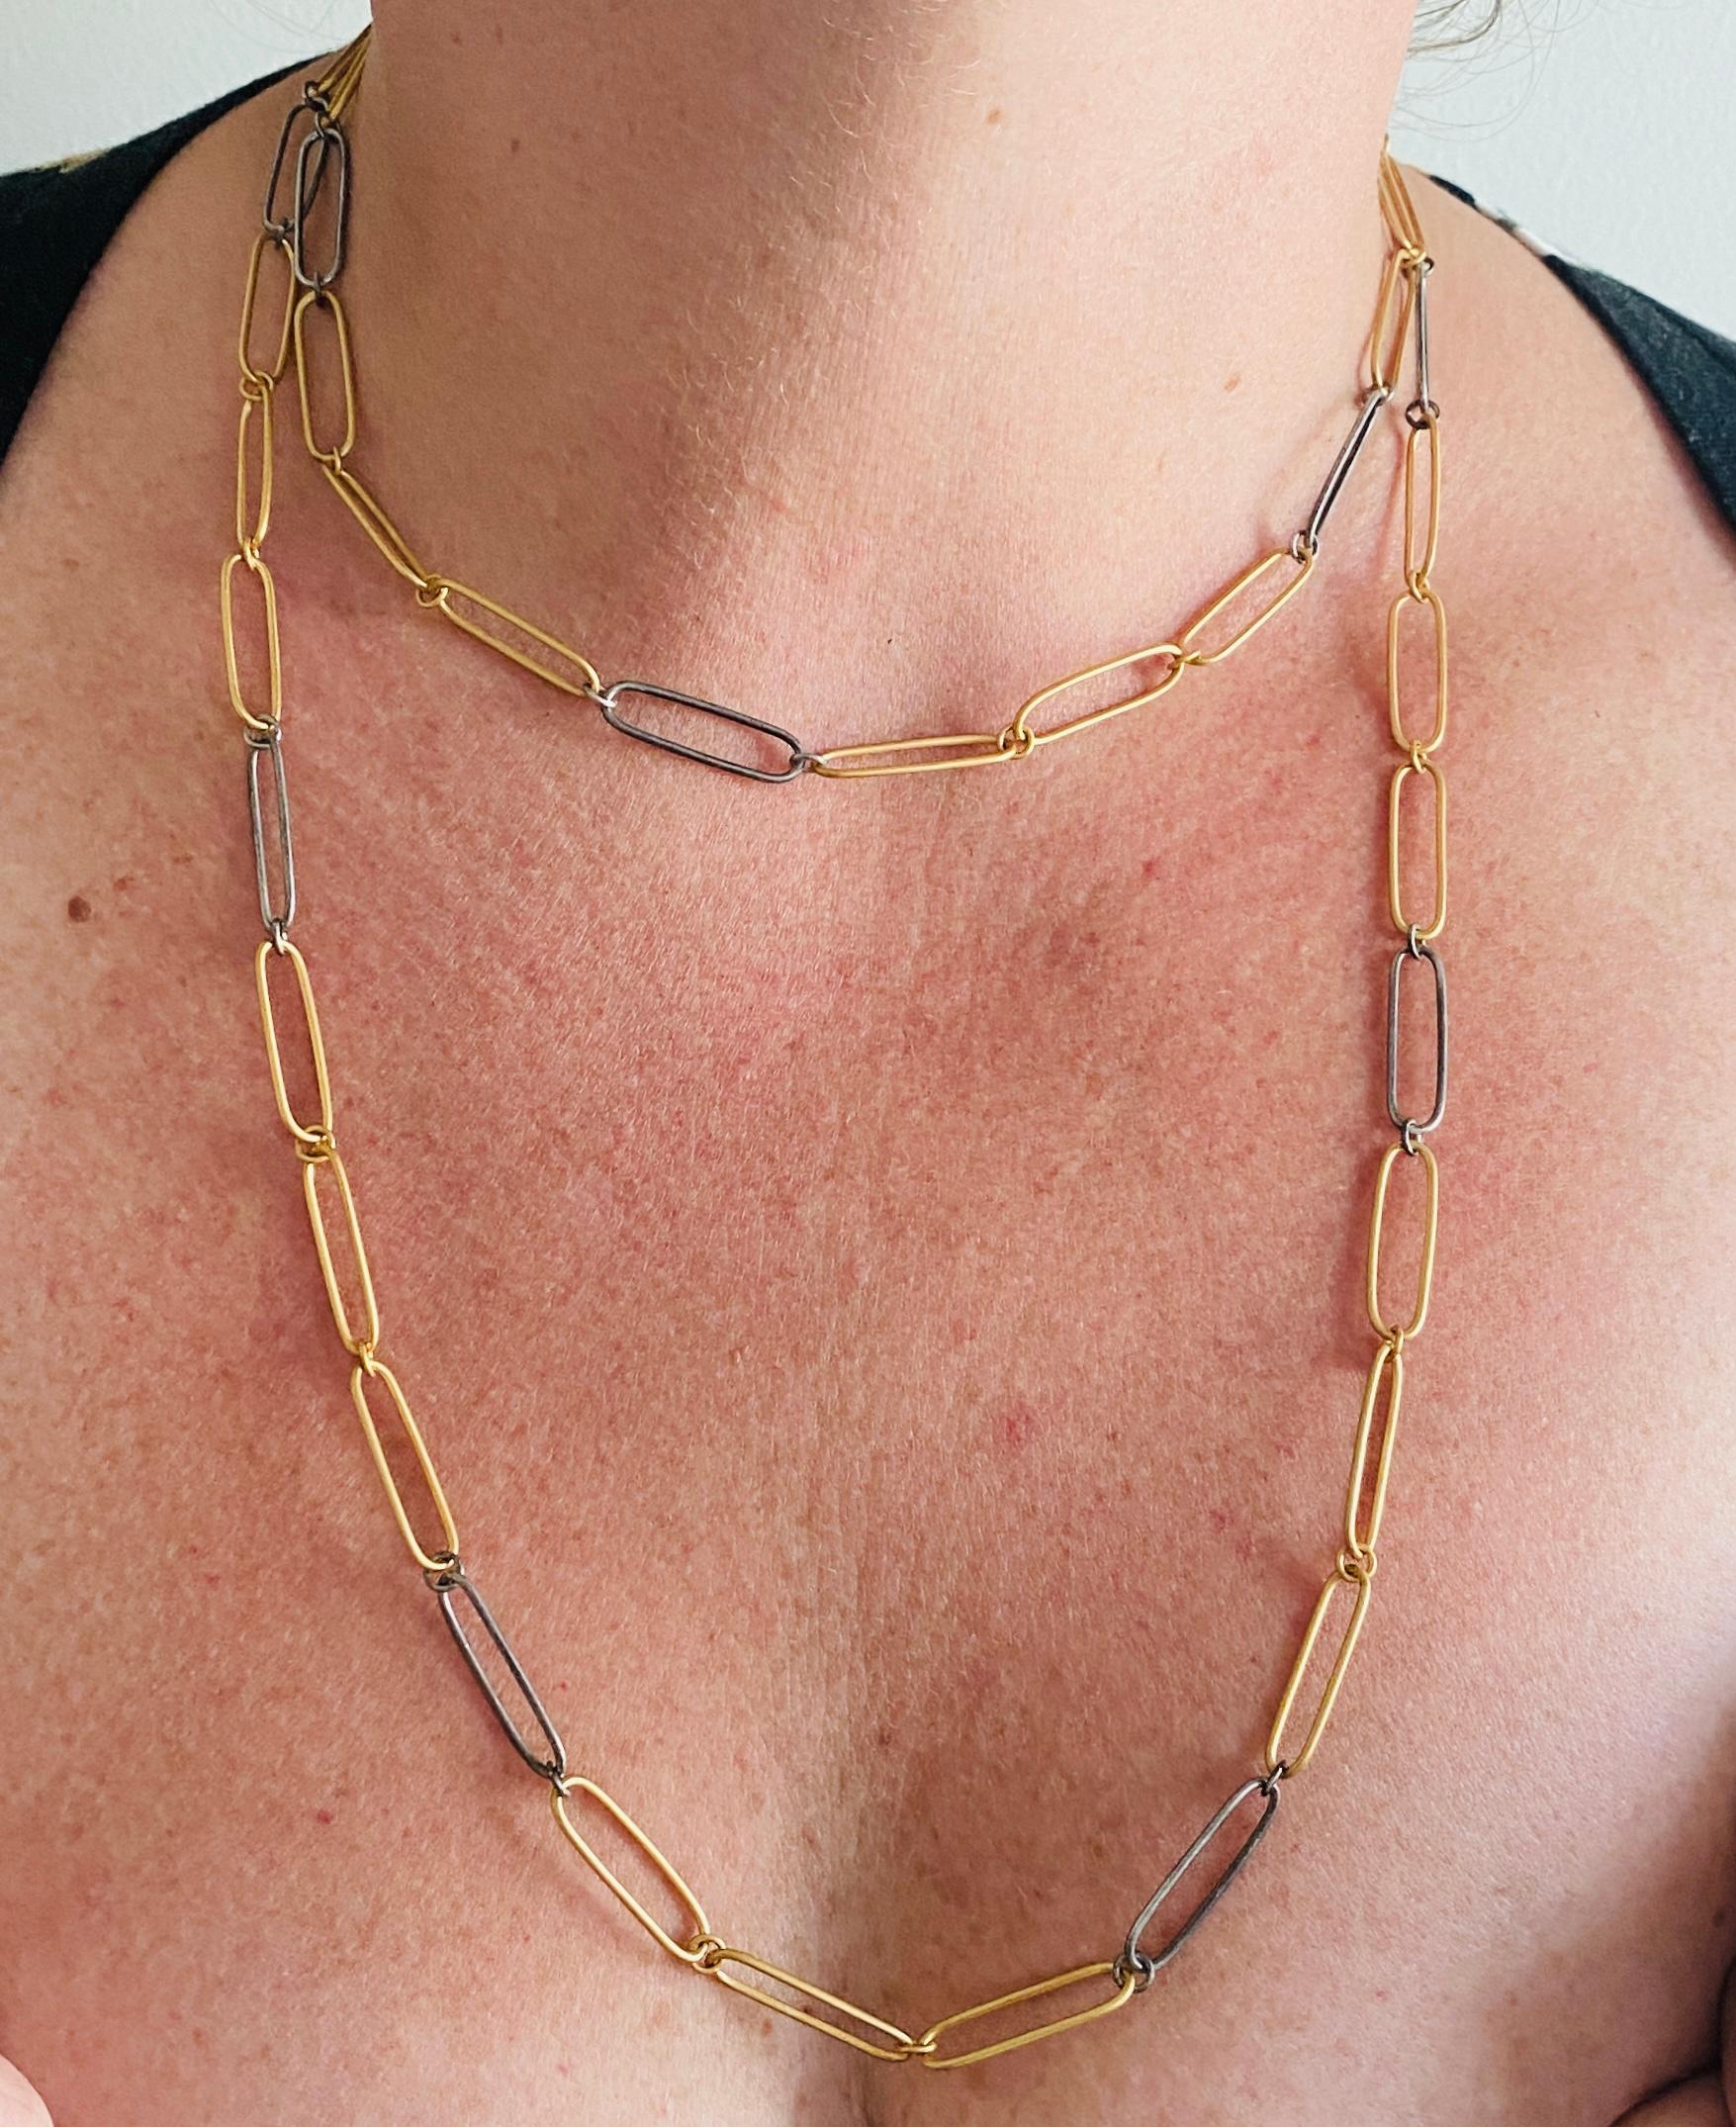 Two-Toned, 24K Gold and Silver Long Chain Necklace, 25